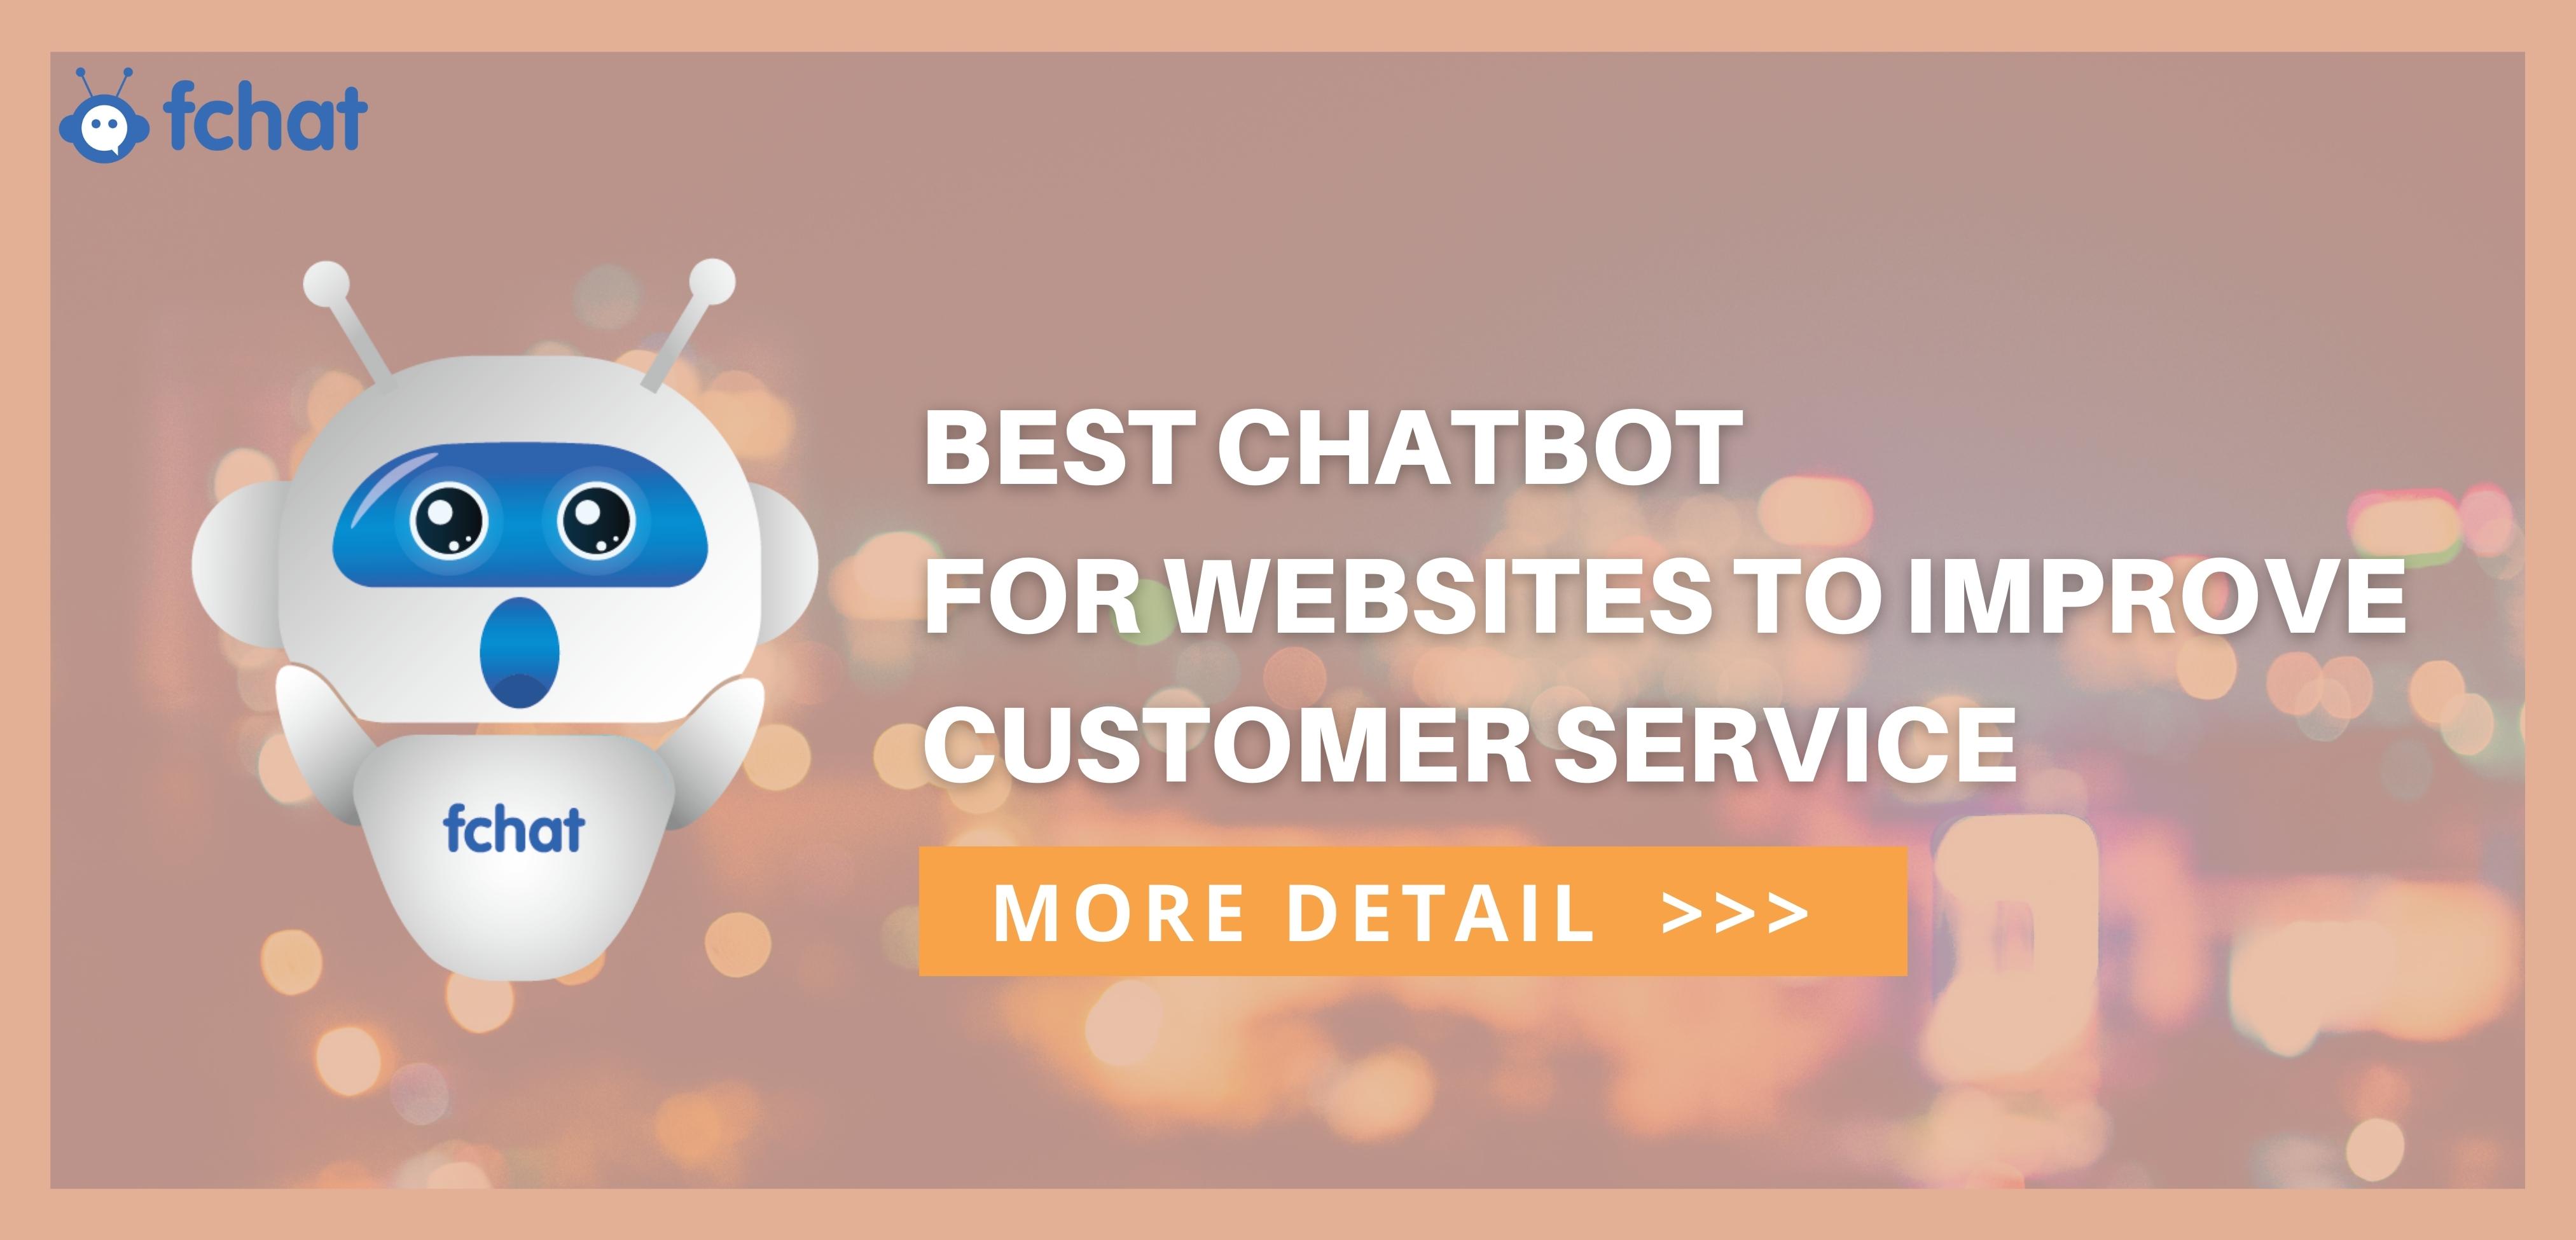 THE BEST WEBSITE CHATBOT TO IMPROVE CUSTOMER SERVICE